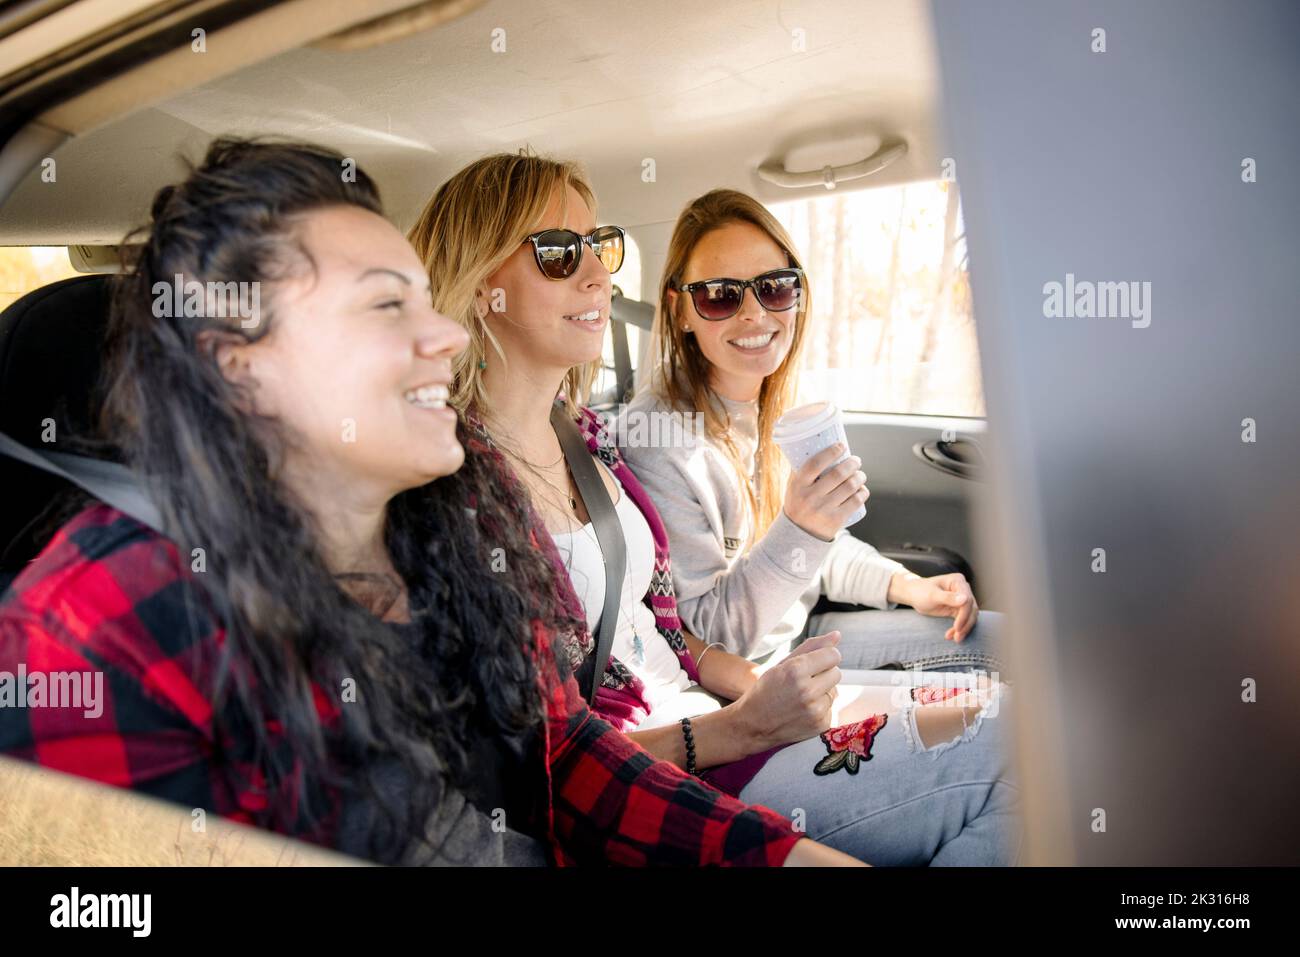 Women chatting in back of car Stock Photo